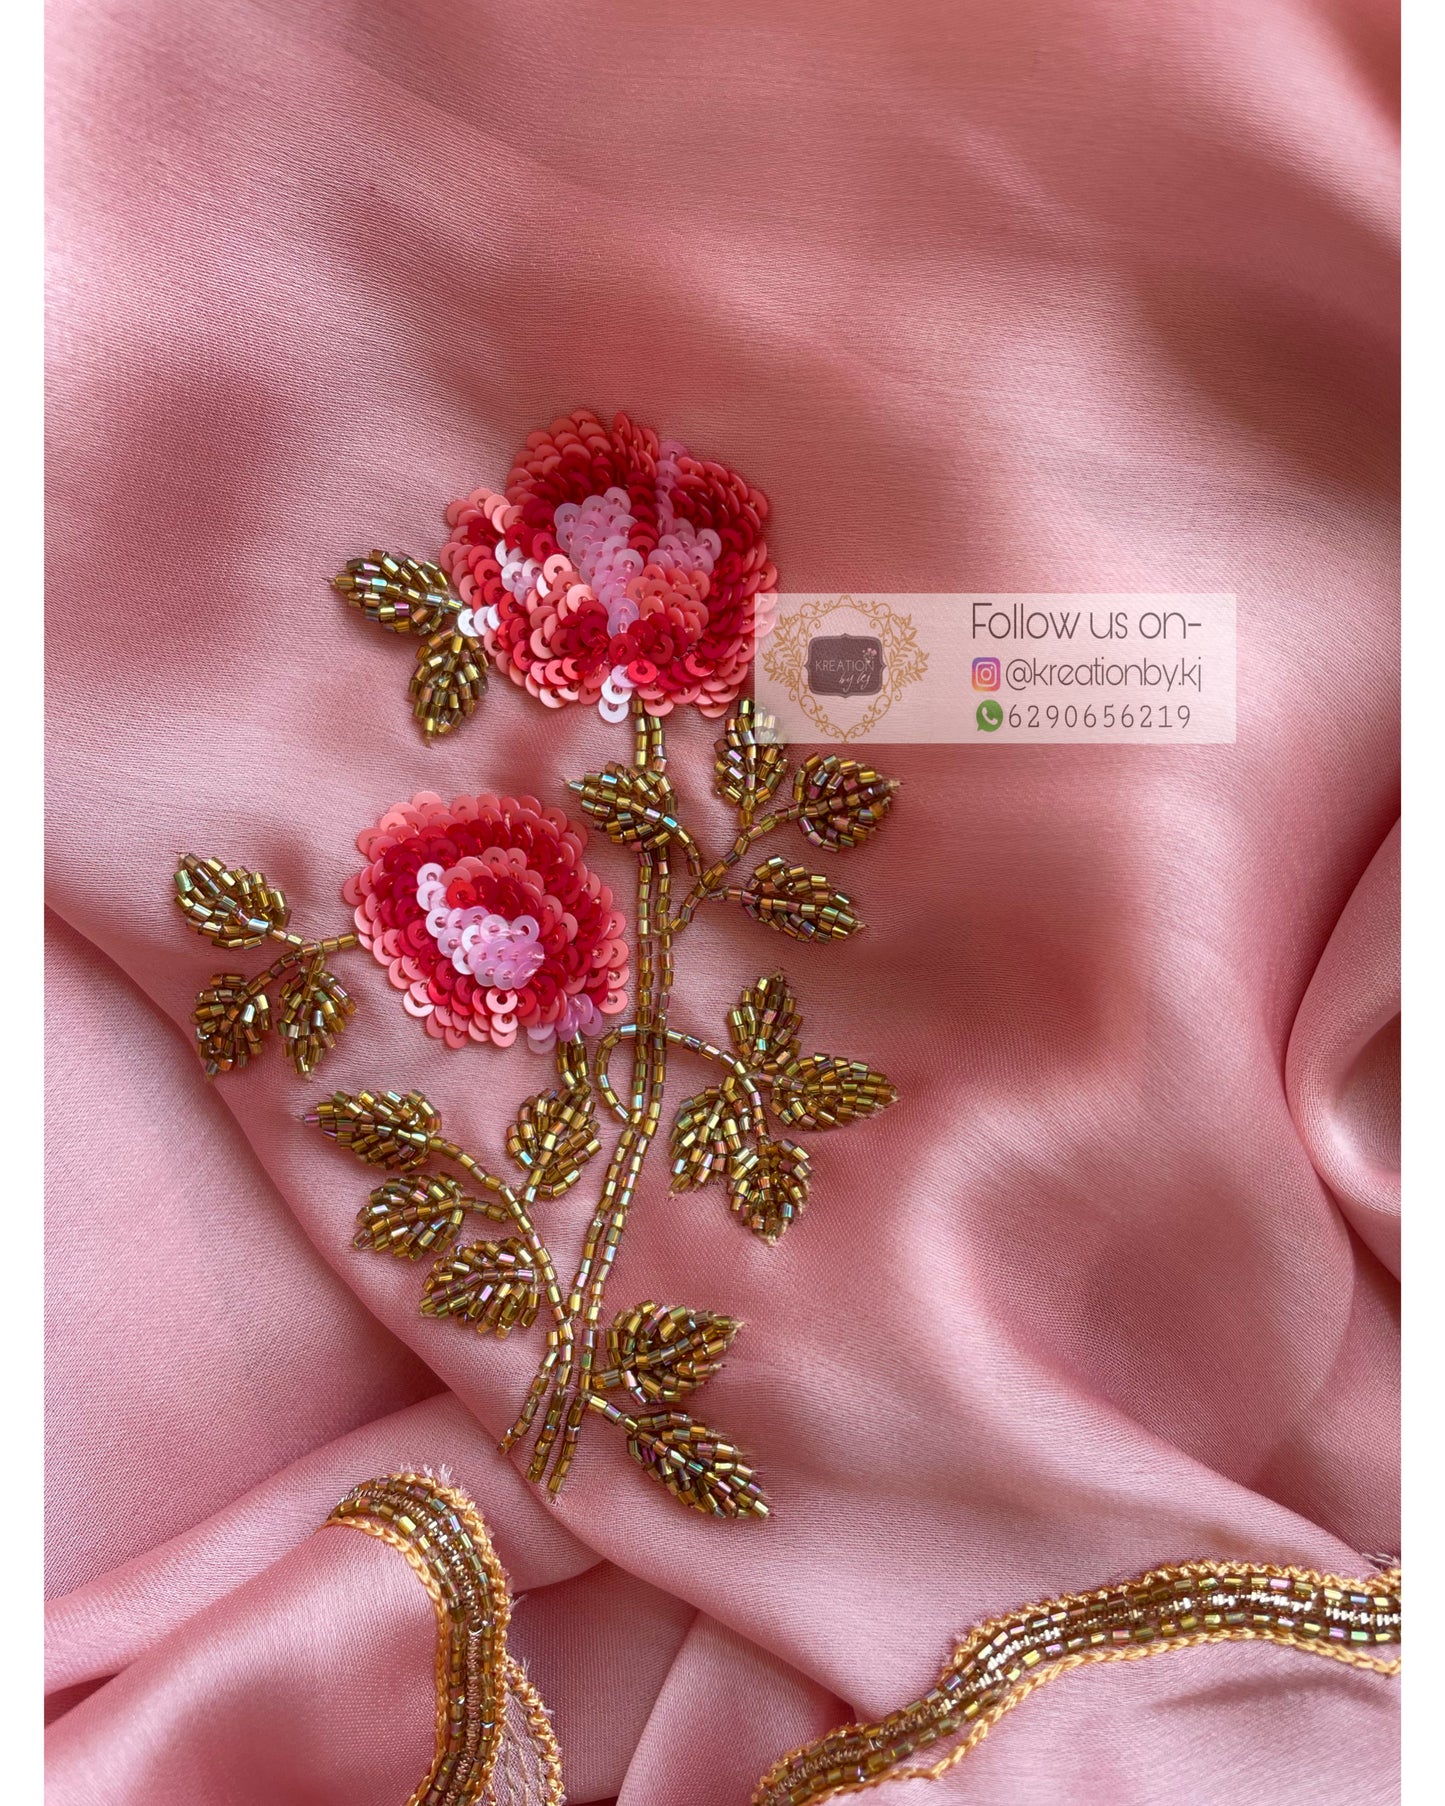 Remember the Roses Onion Pink Crepe Silk Saree - kreationbykj